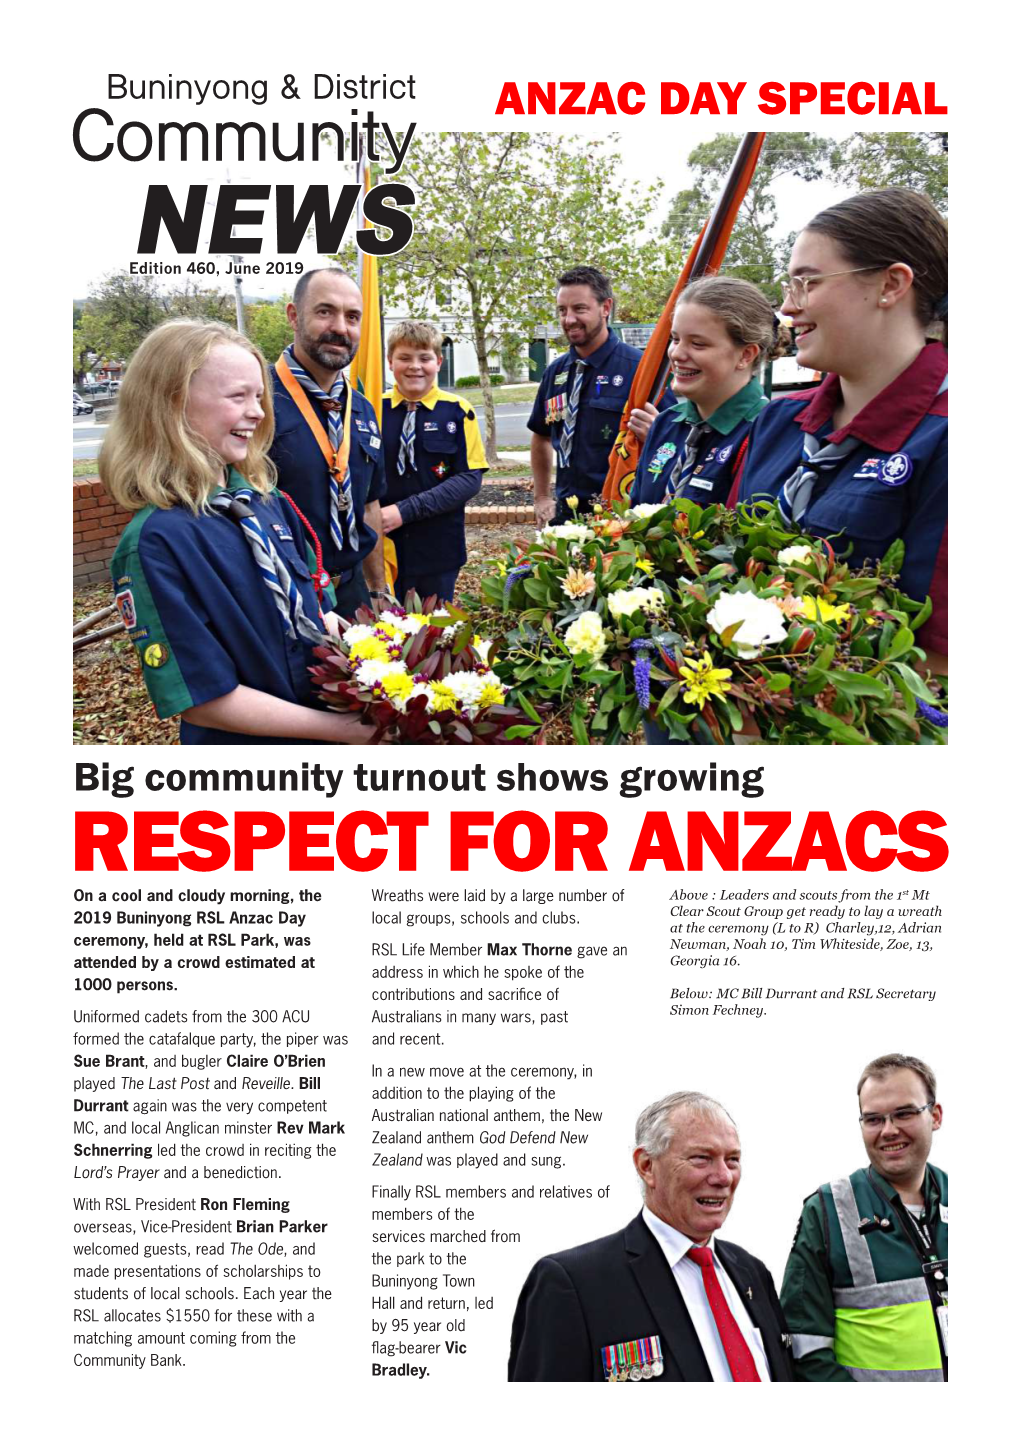 Respect for Anzacs